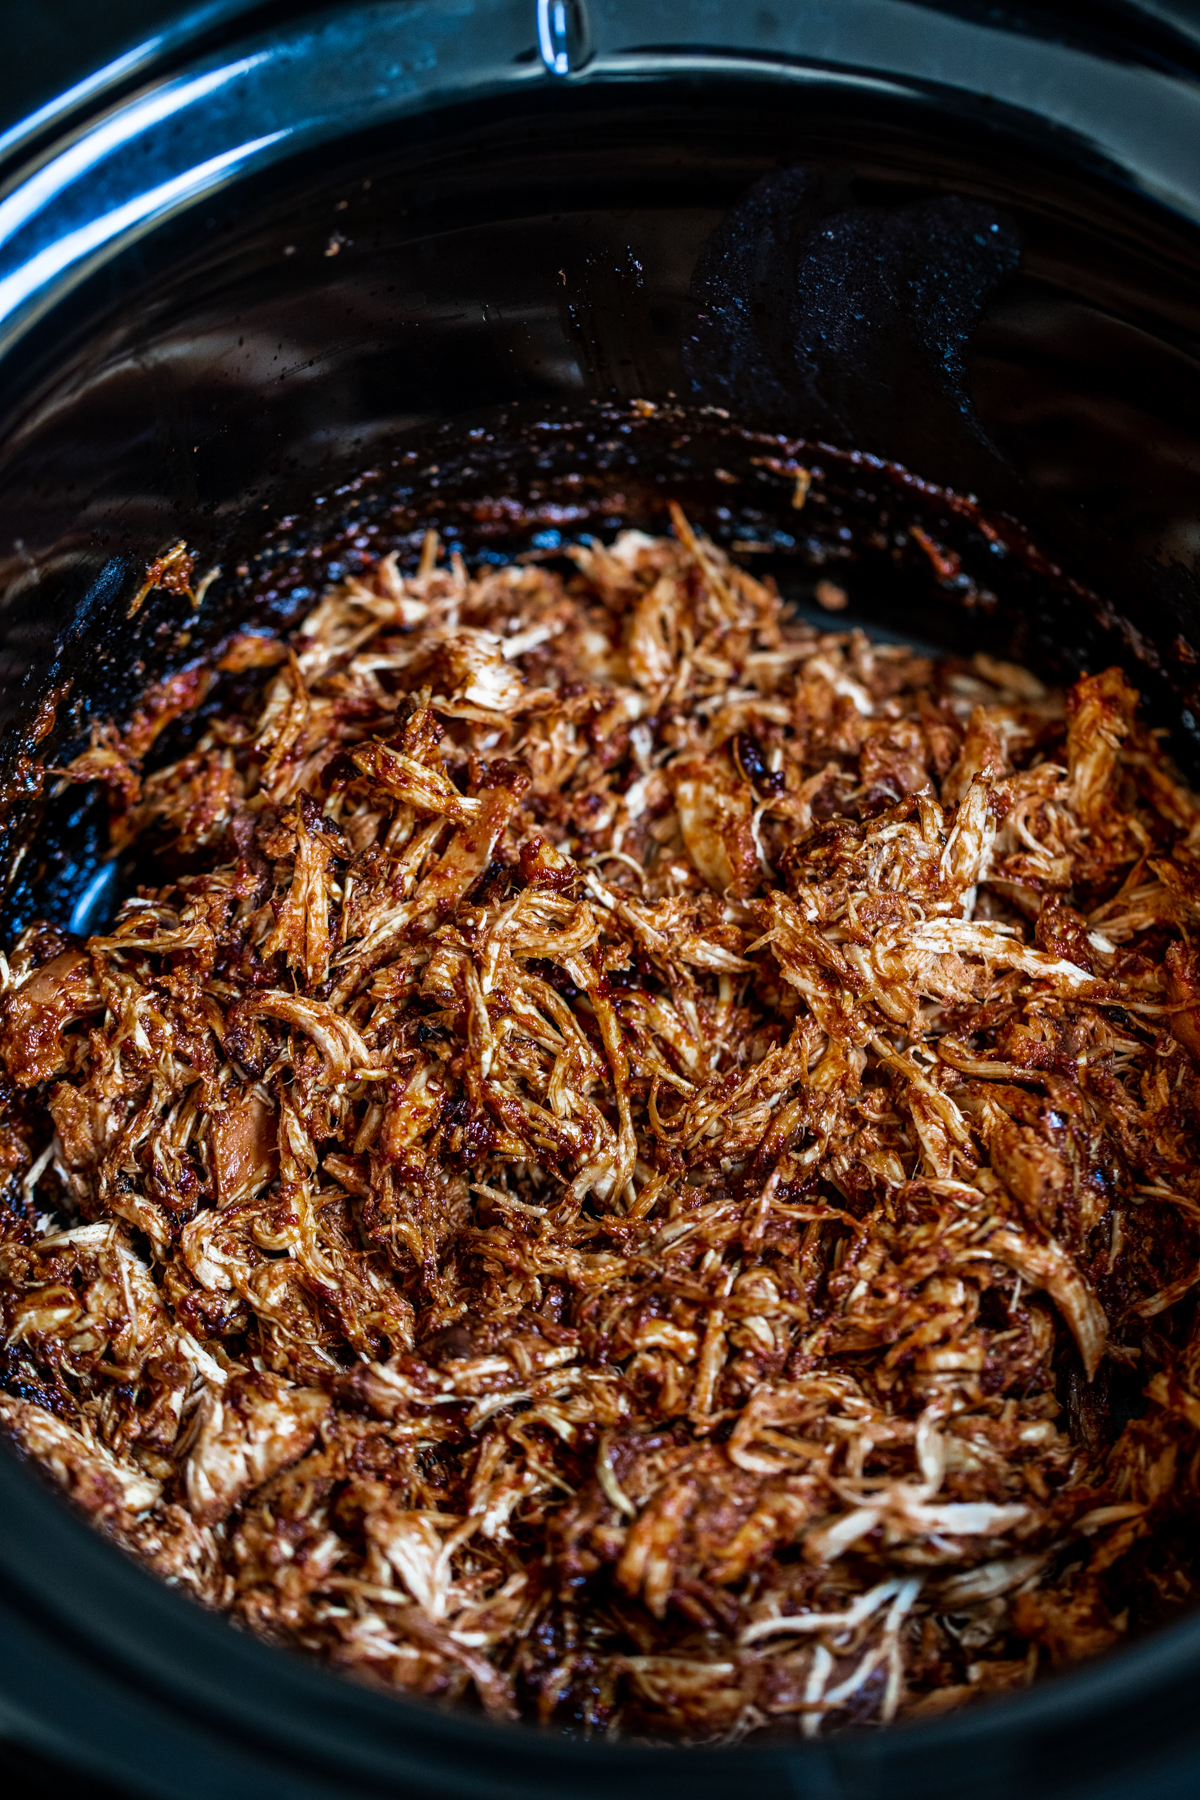 Shredded slow cooked chipotle chicken breast in the slow cooker after being shredded